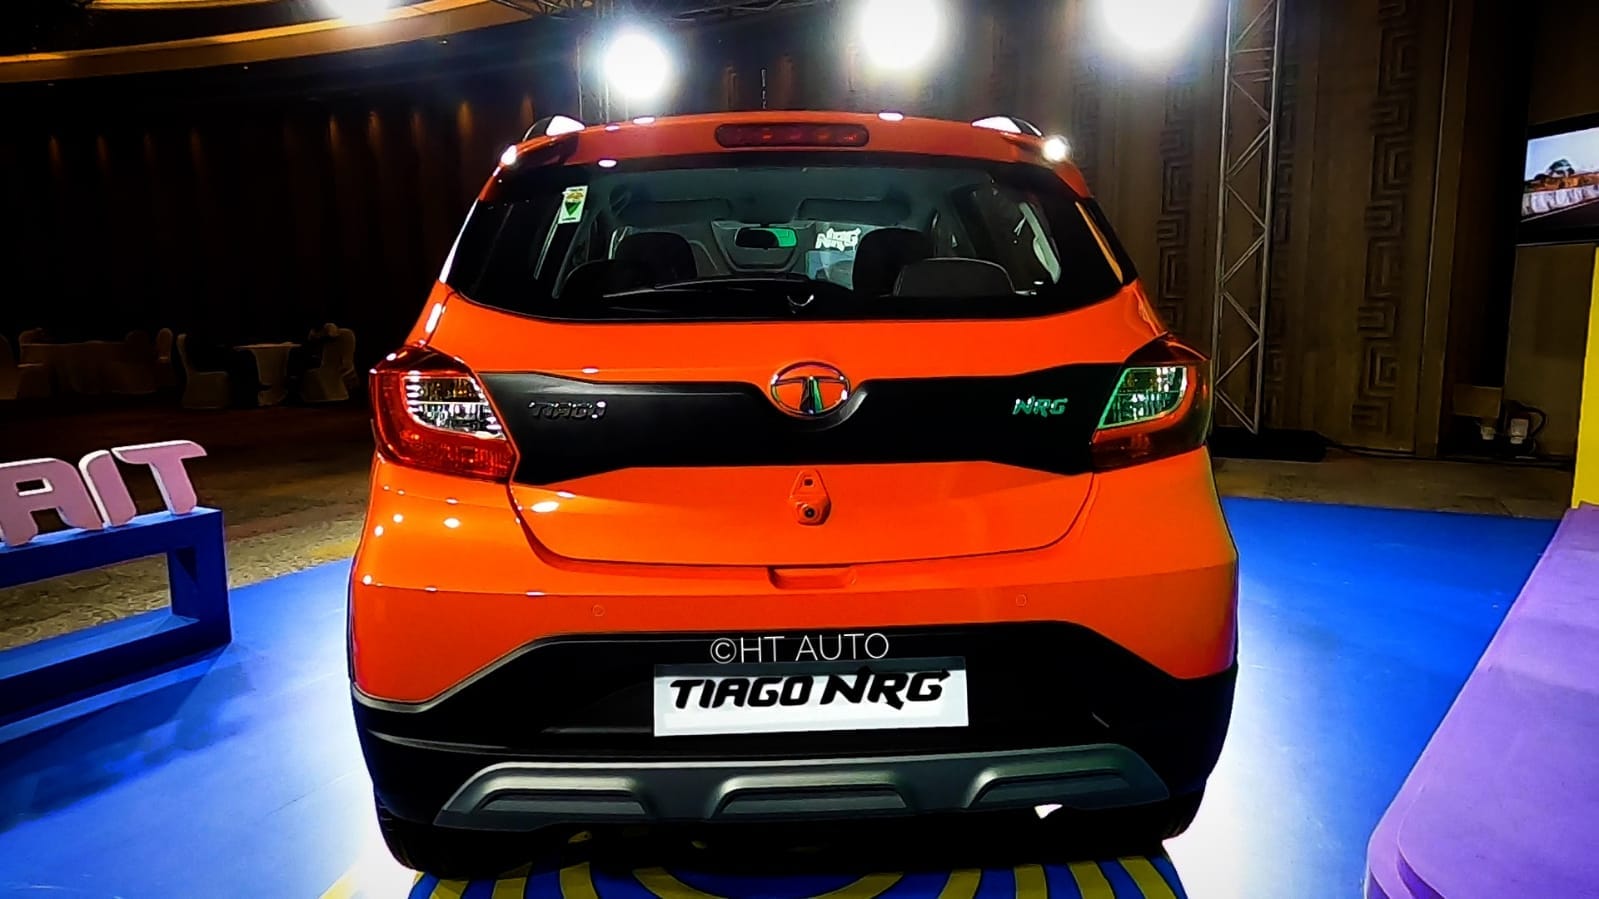 A look at the rear profile of Tiago NRG.